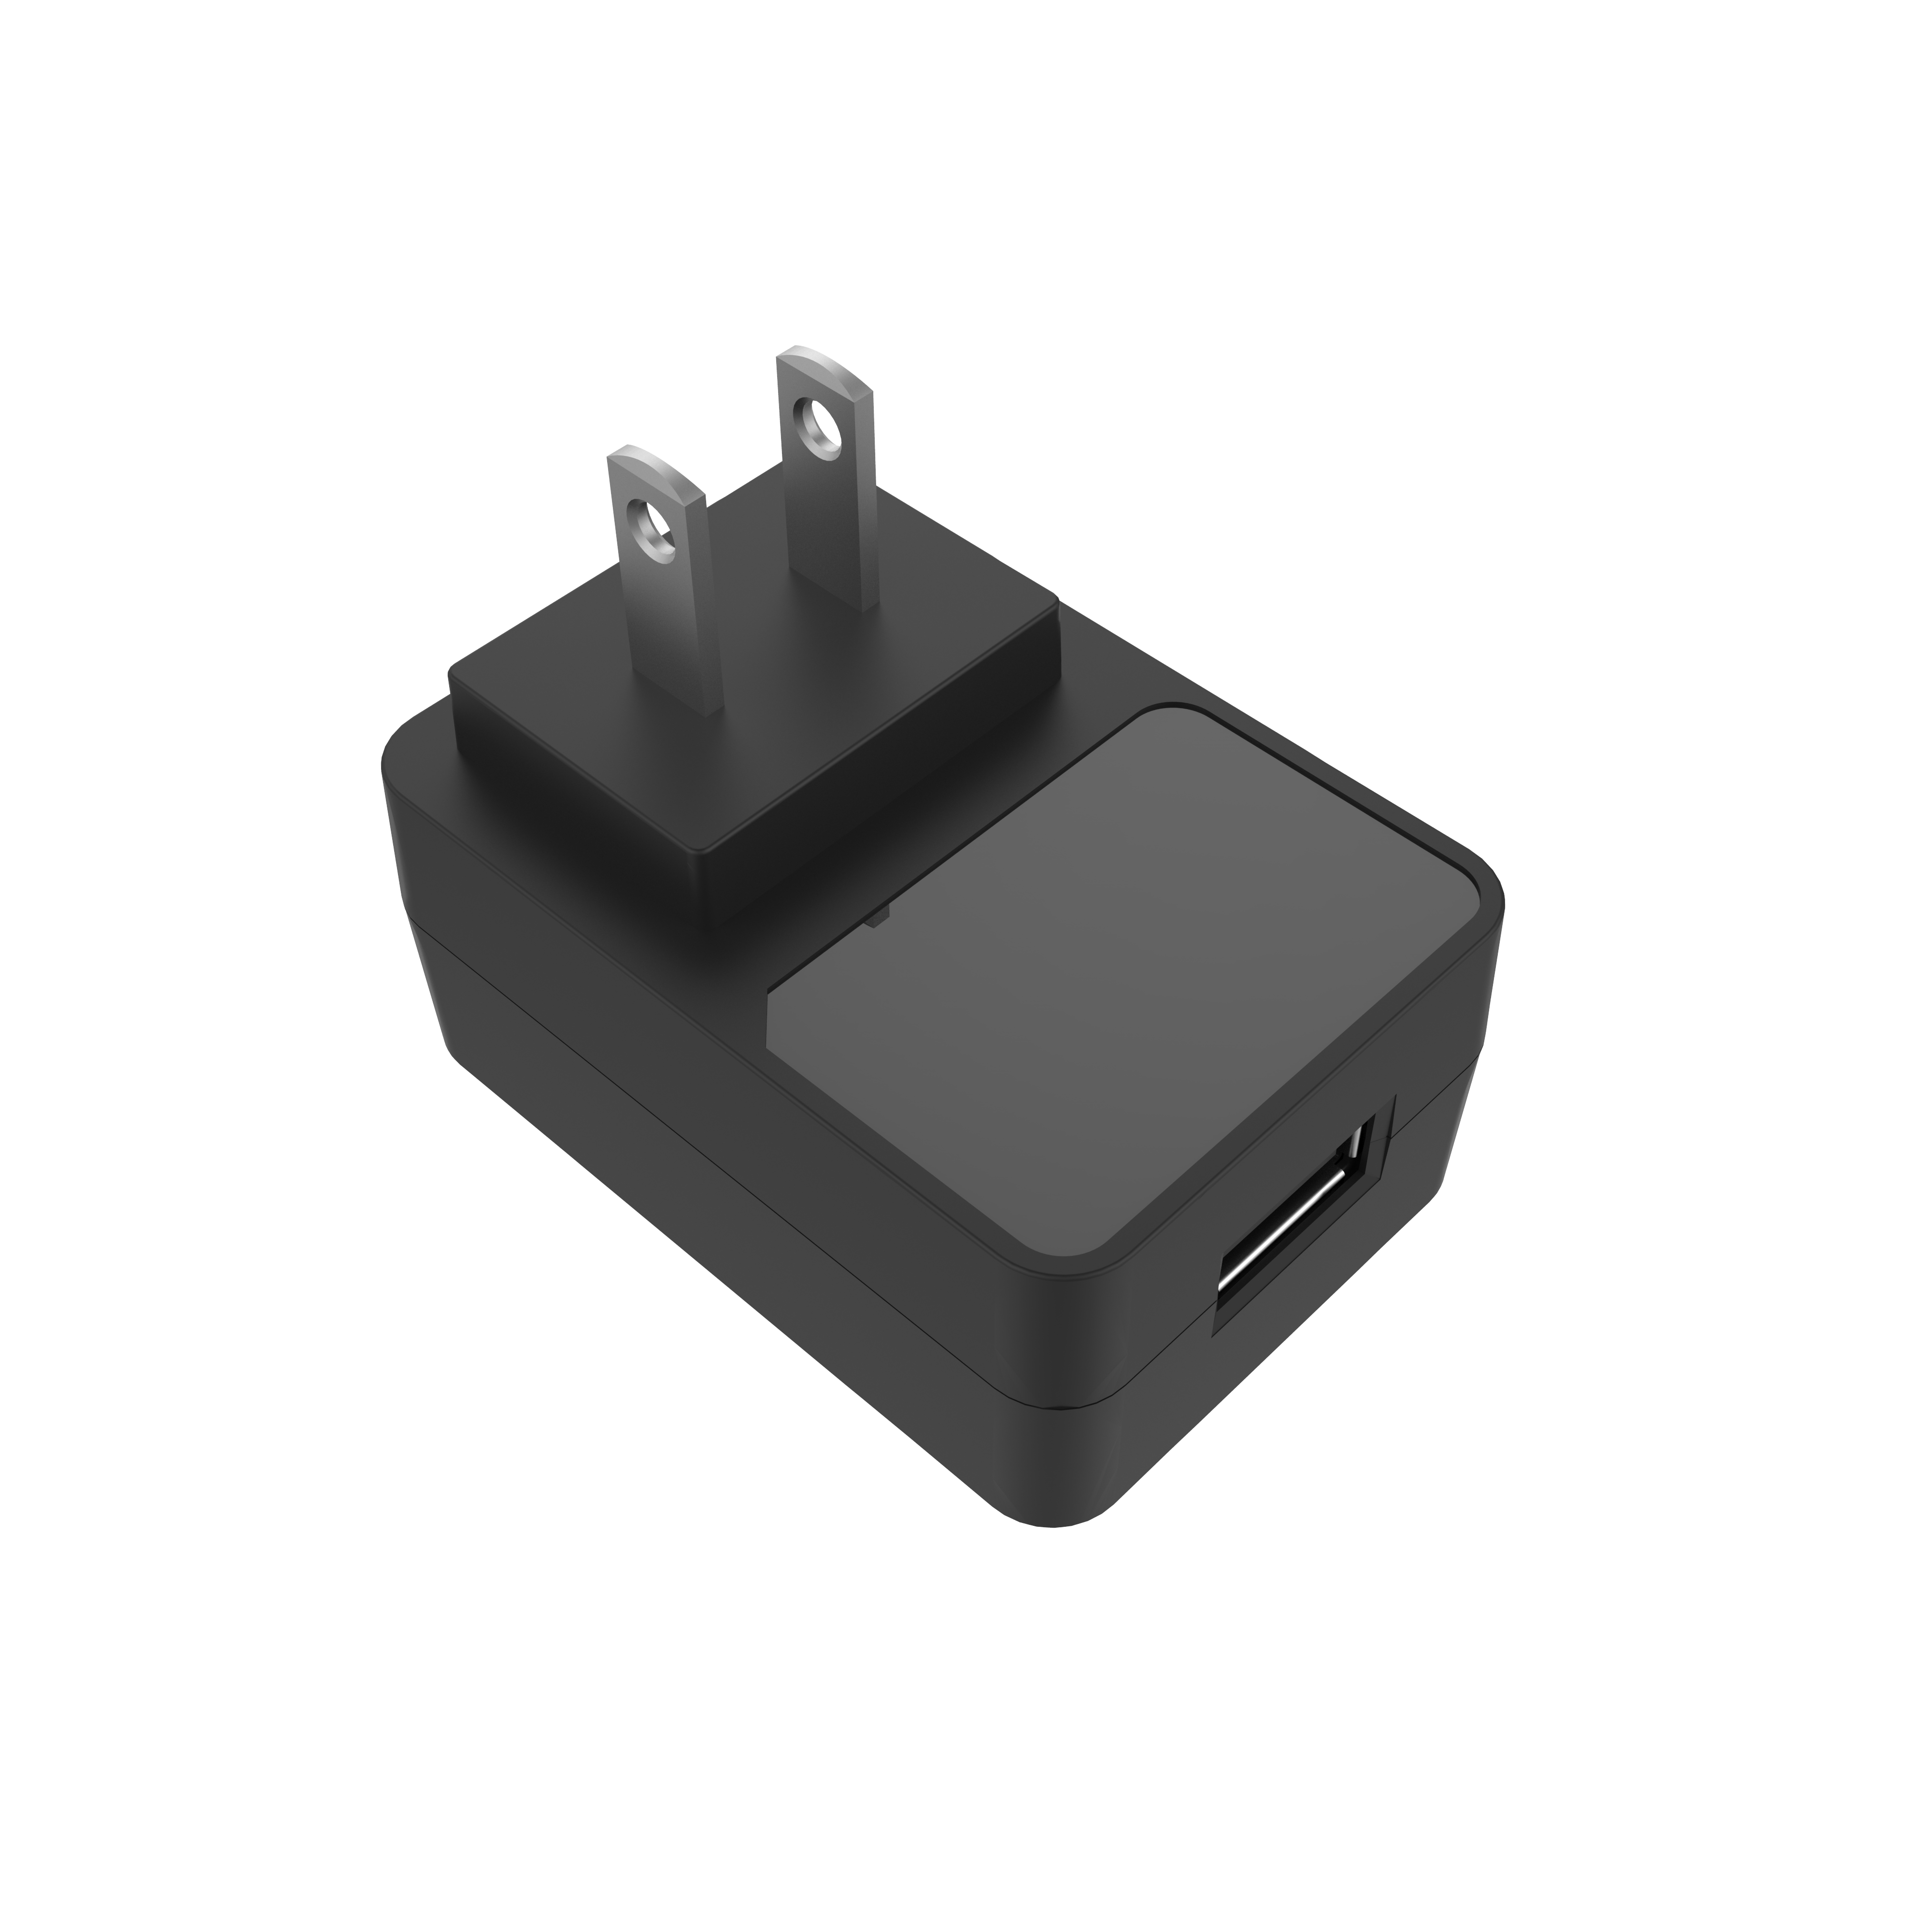 Frontpower 5V 2.4A US power adapter usb charger portable travel with UL FCC certs for phone